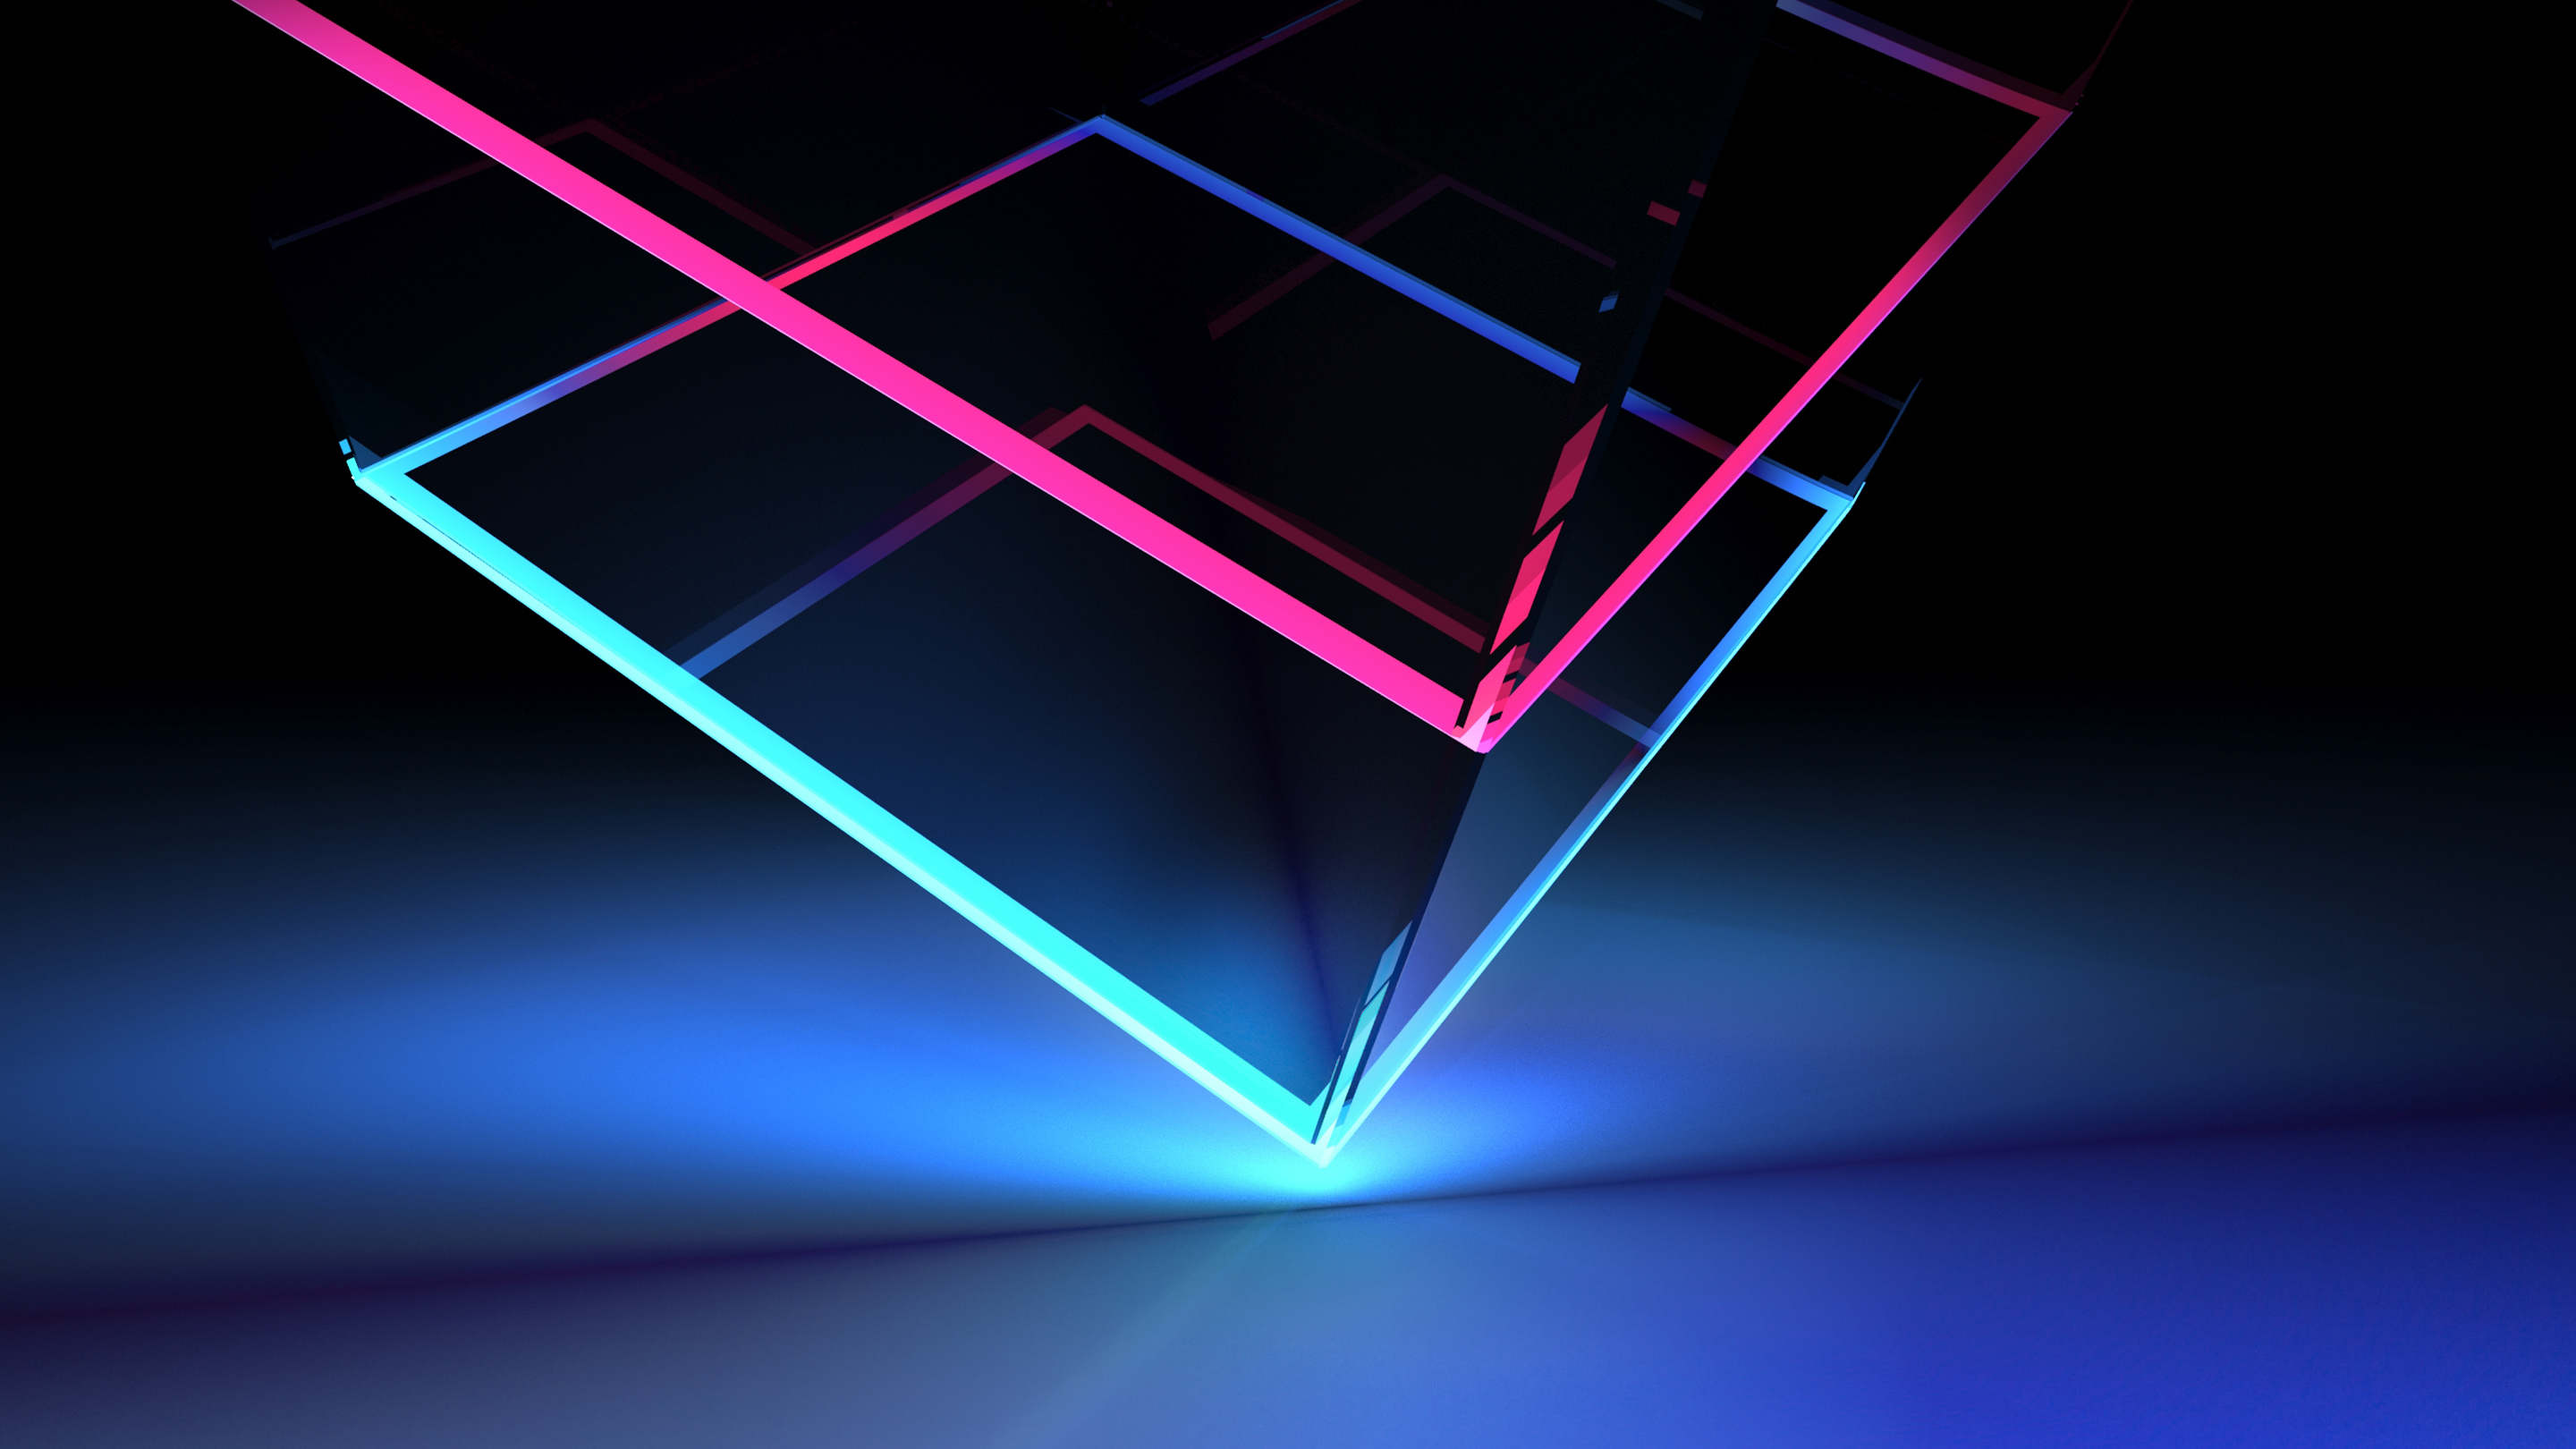 3d cube hd wallpapers